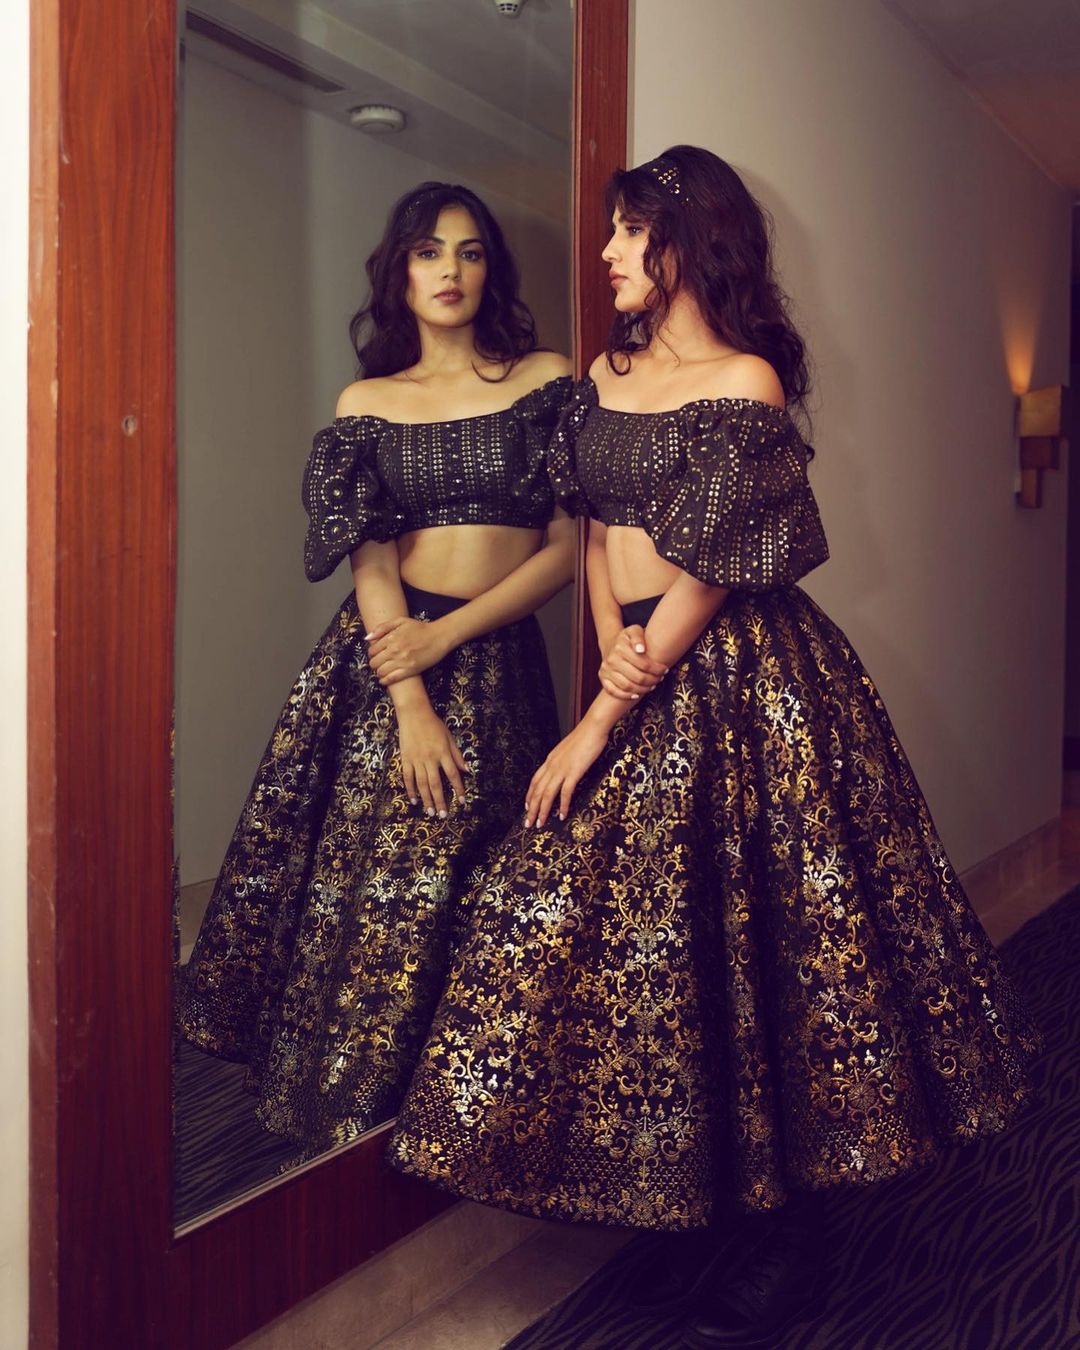 Rhea Chakraborty is a sight to behold in a shimmering black and gold lehenga